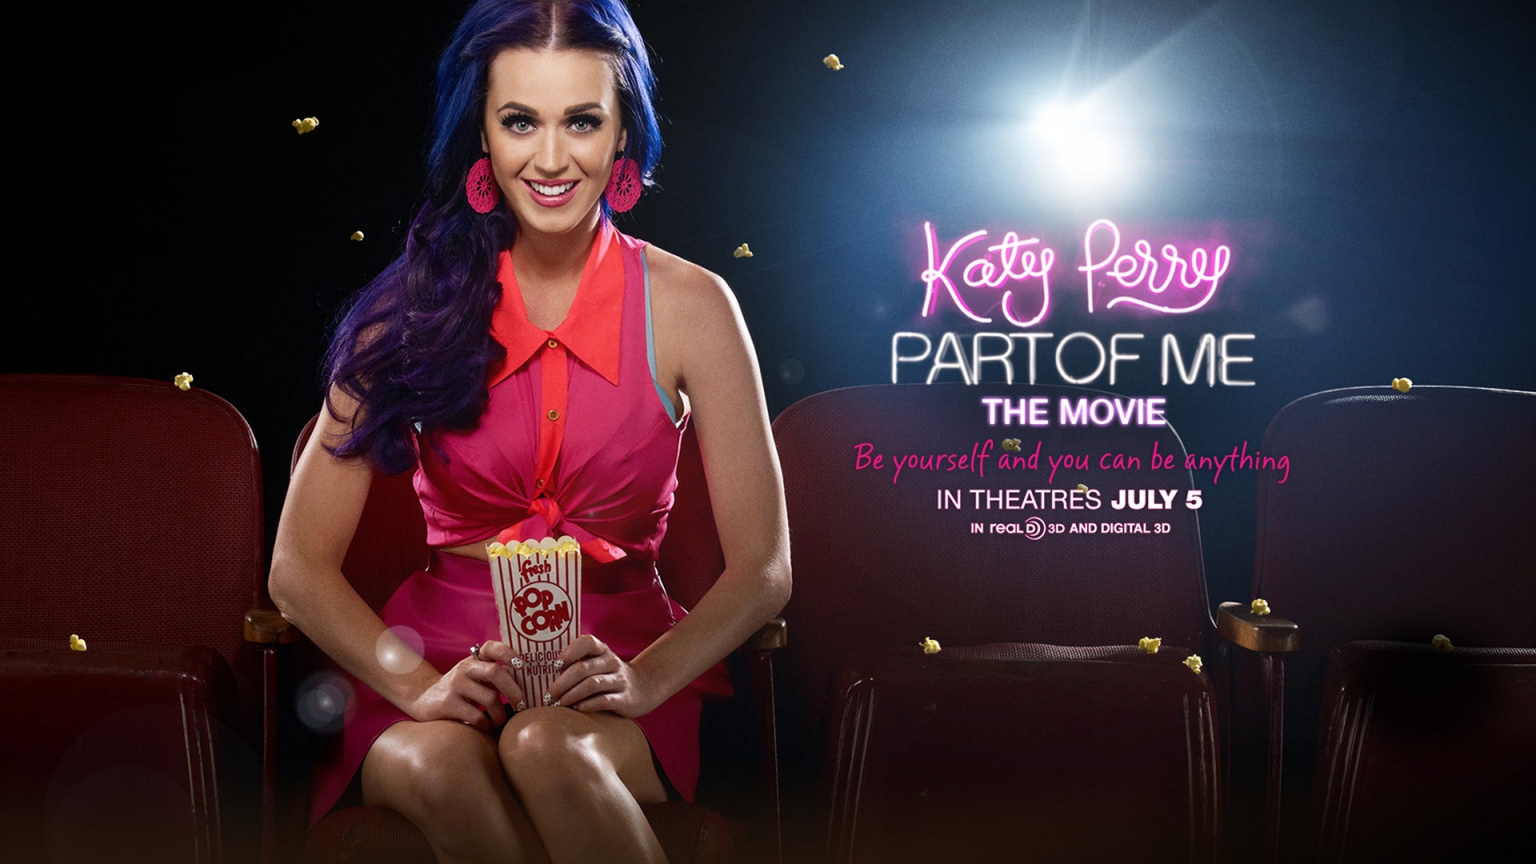 Katy Perry Part Of Me Movie 2012 for 1536 x 864 HDTV resolution